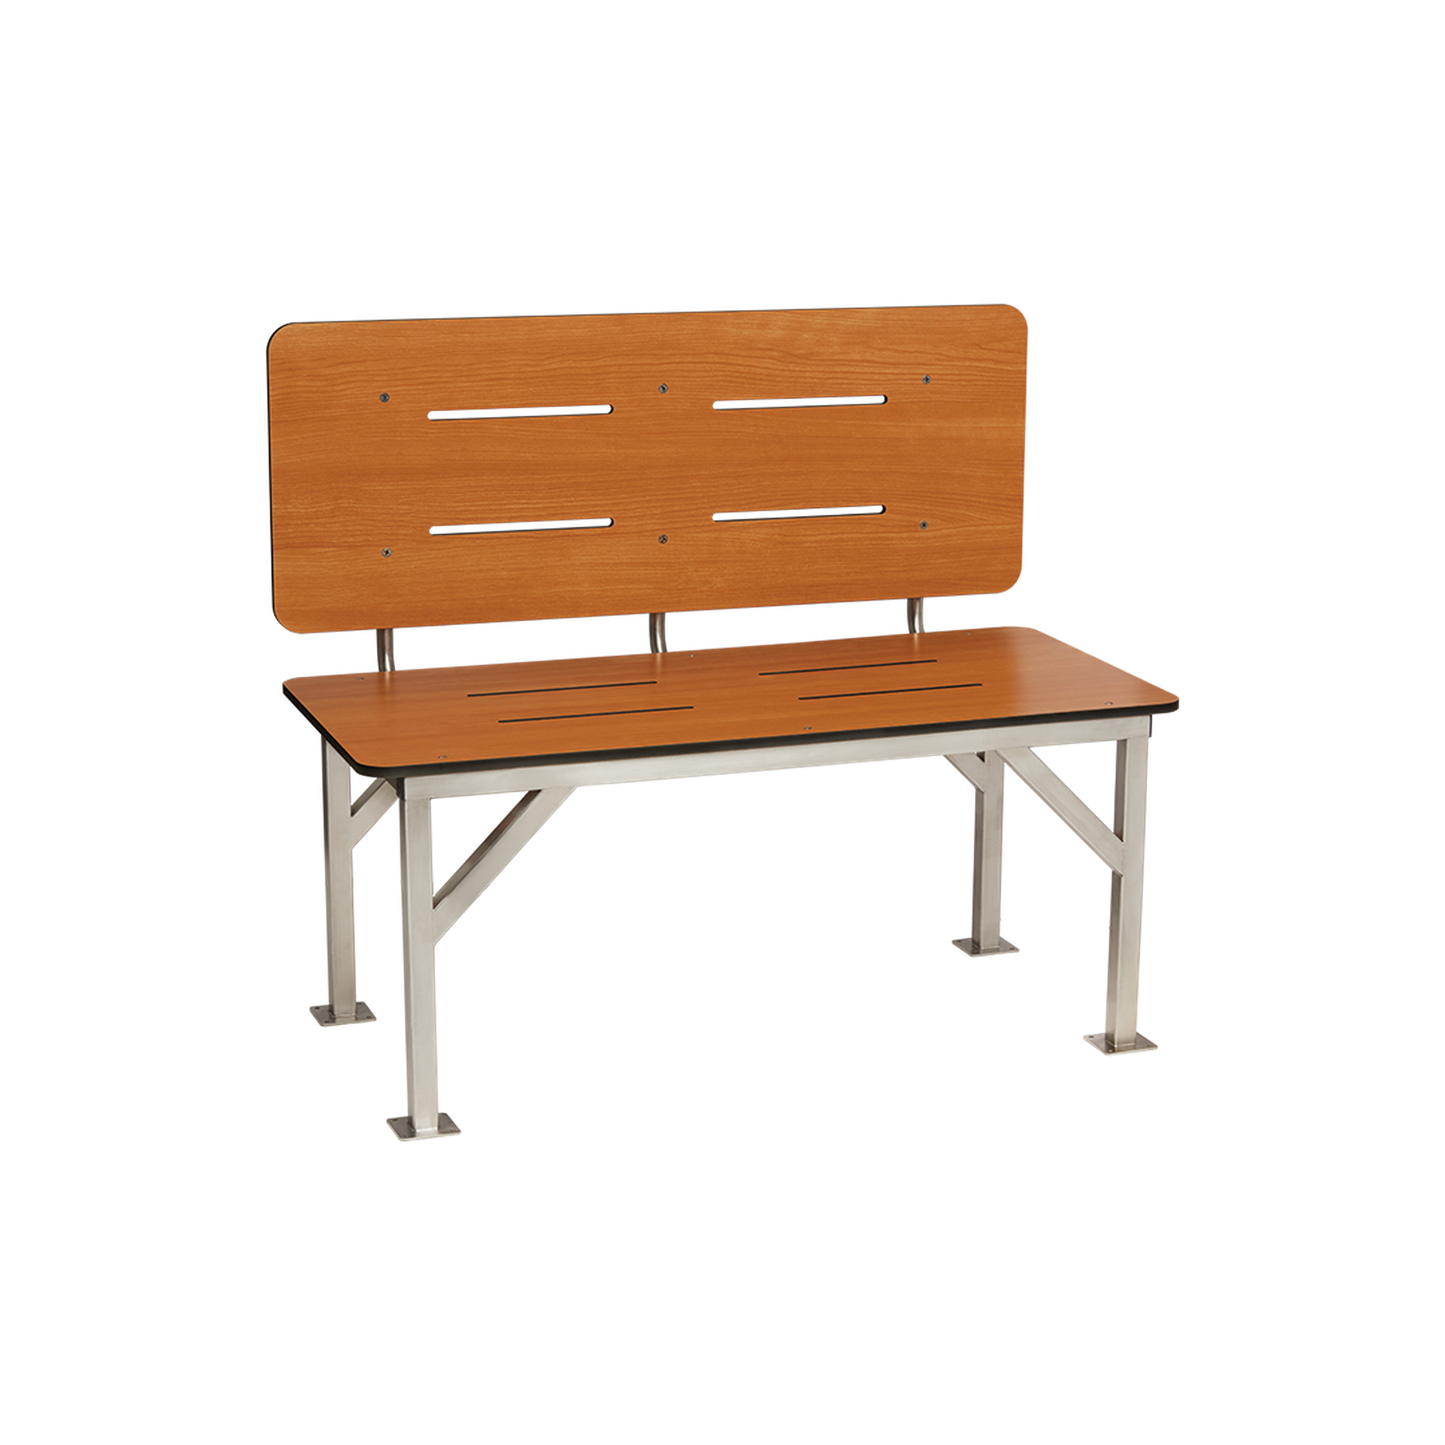 Seachrome Signature Series 48" W x 24" D Teak One-Piece Solid Phenolic Stationary Bench Seat With Backrest